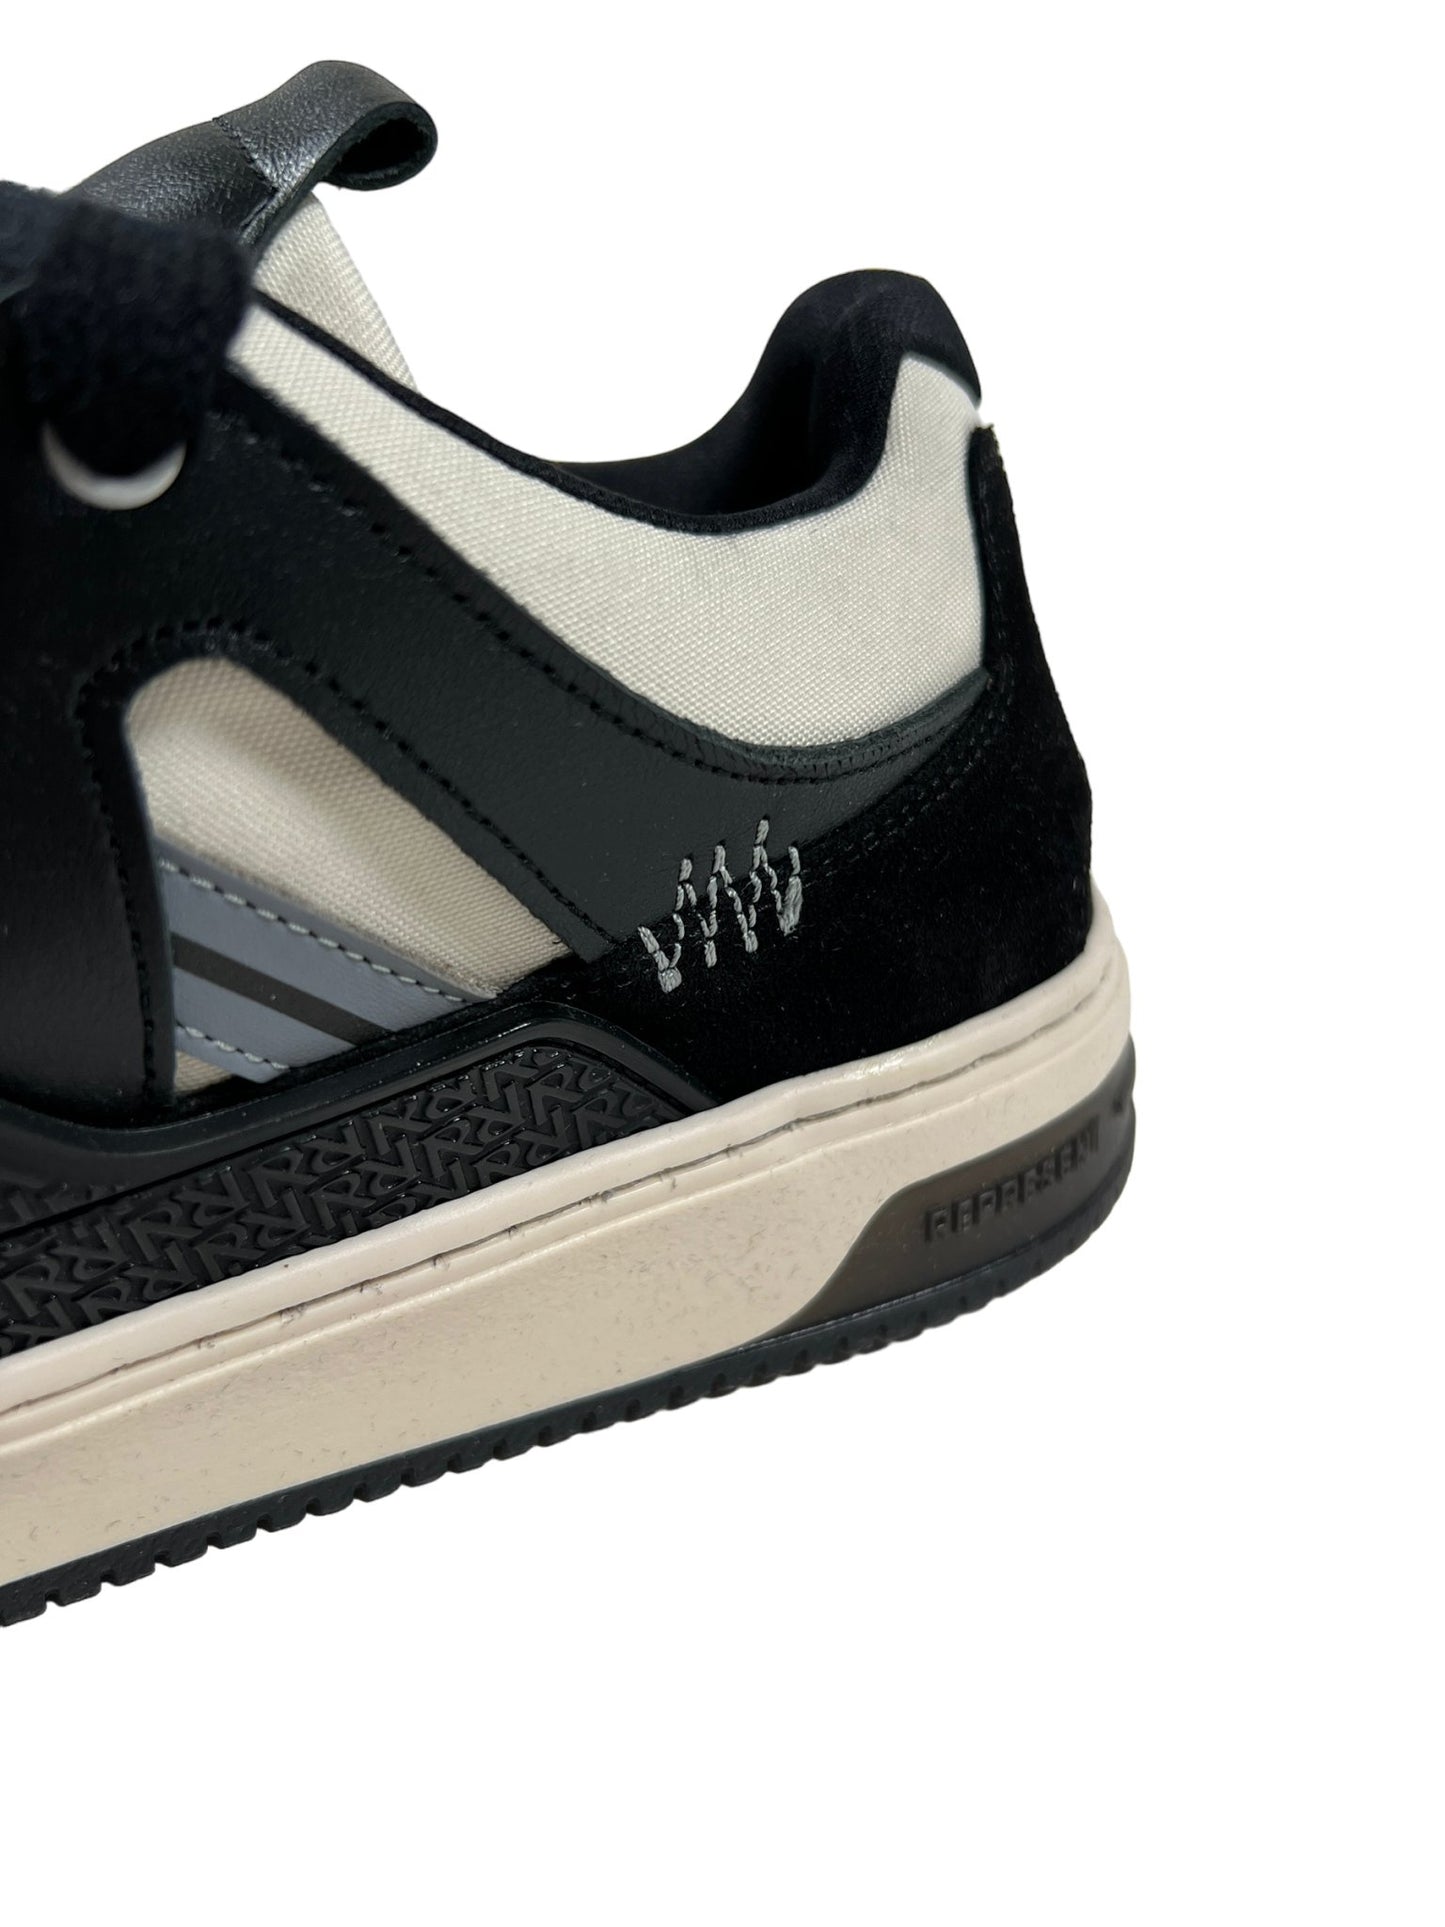 Close-up of a REPRESENT REPRESENT M12068-37 BULLY LEATHER BLACK sneaker detailing suede and fabric textures, with a small logo on the side.